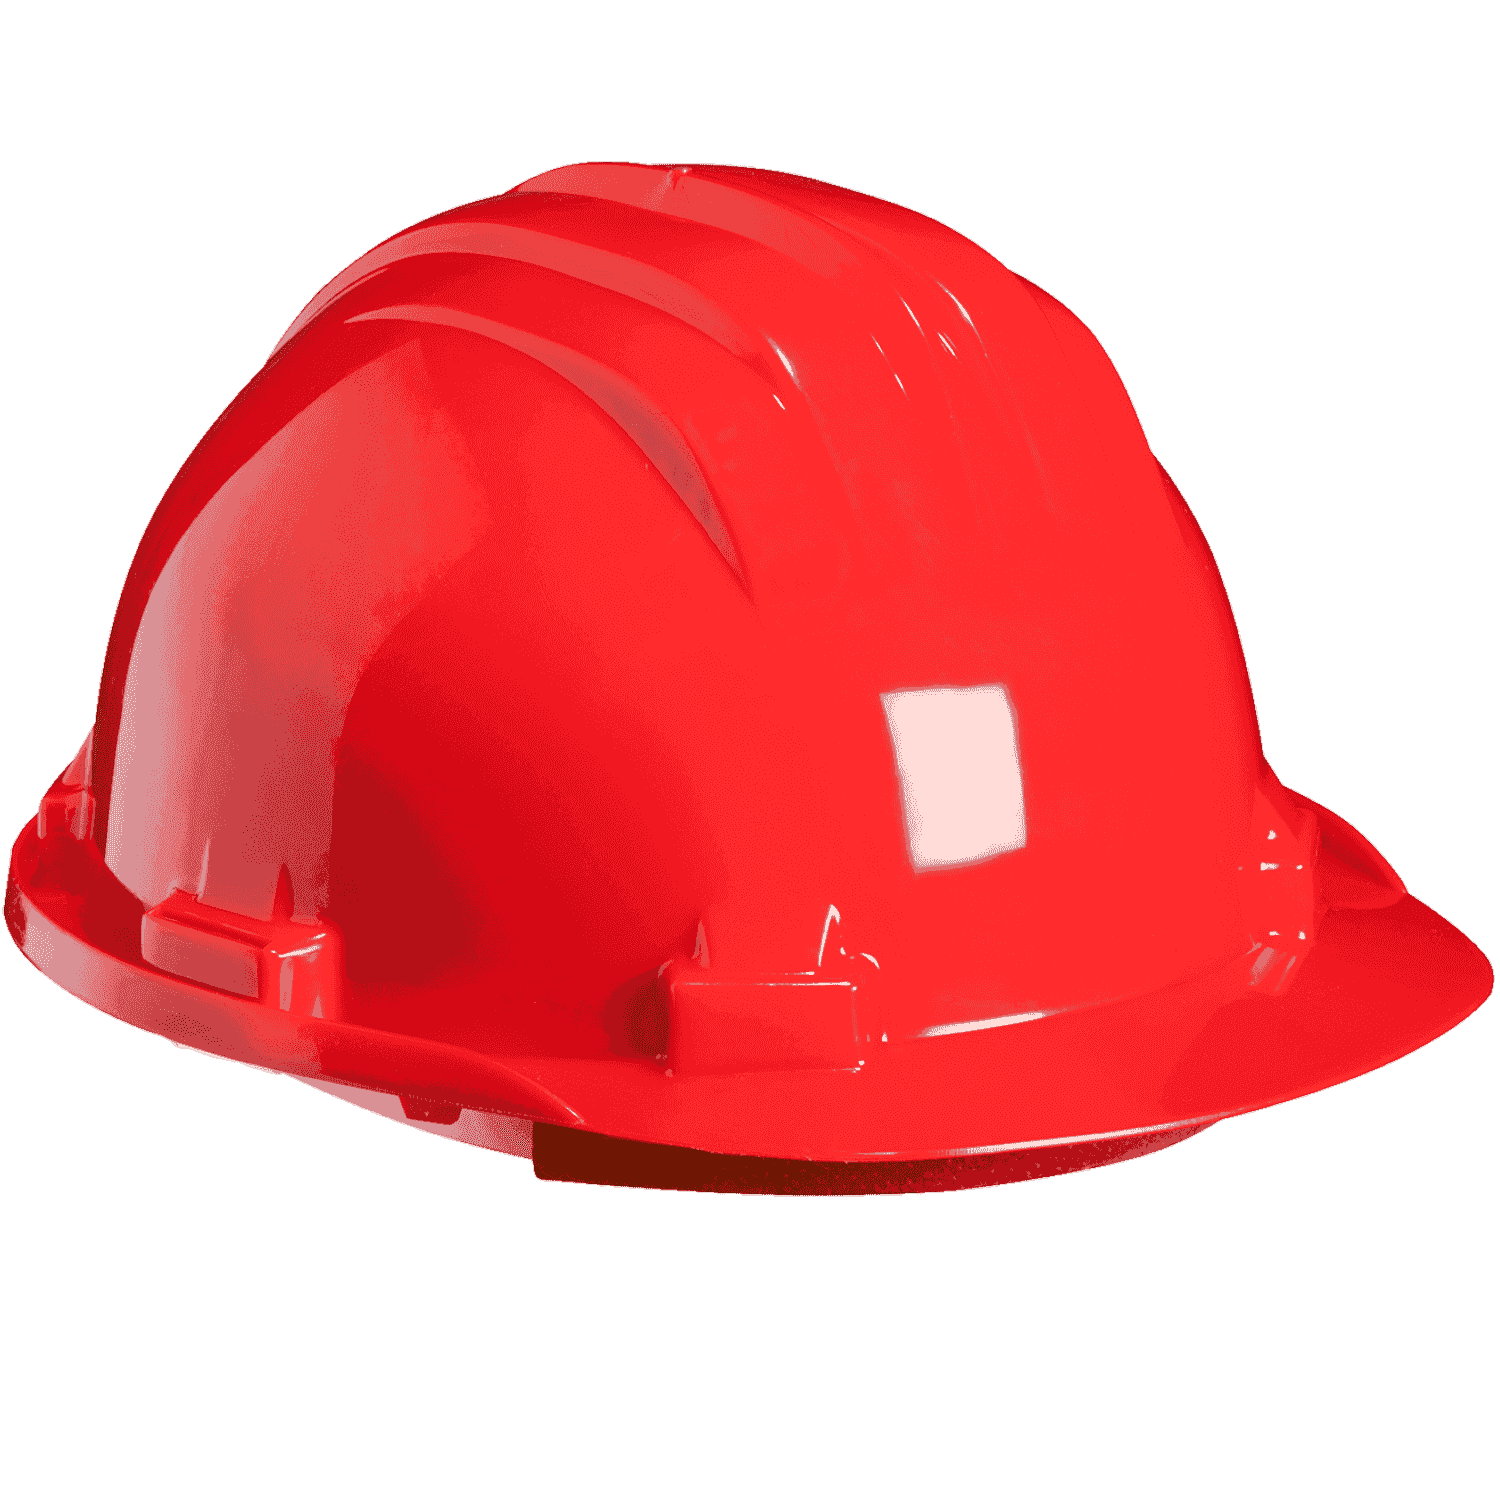 Climax 5-RS Manual Adjustment Safety Helmet Red